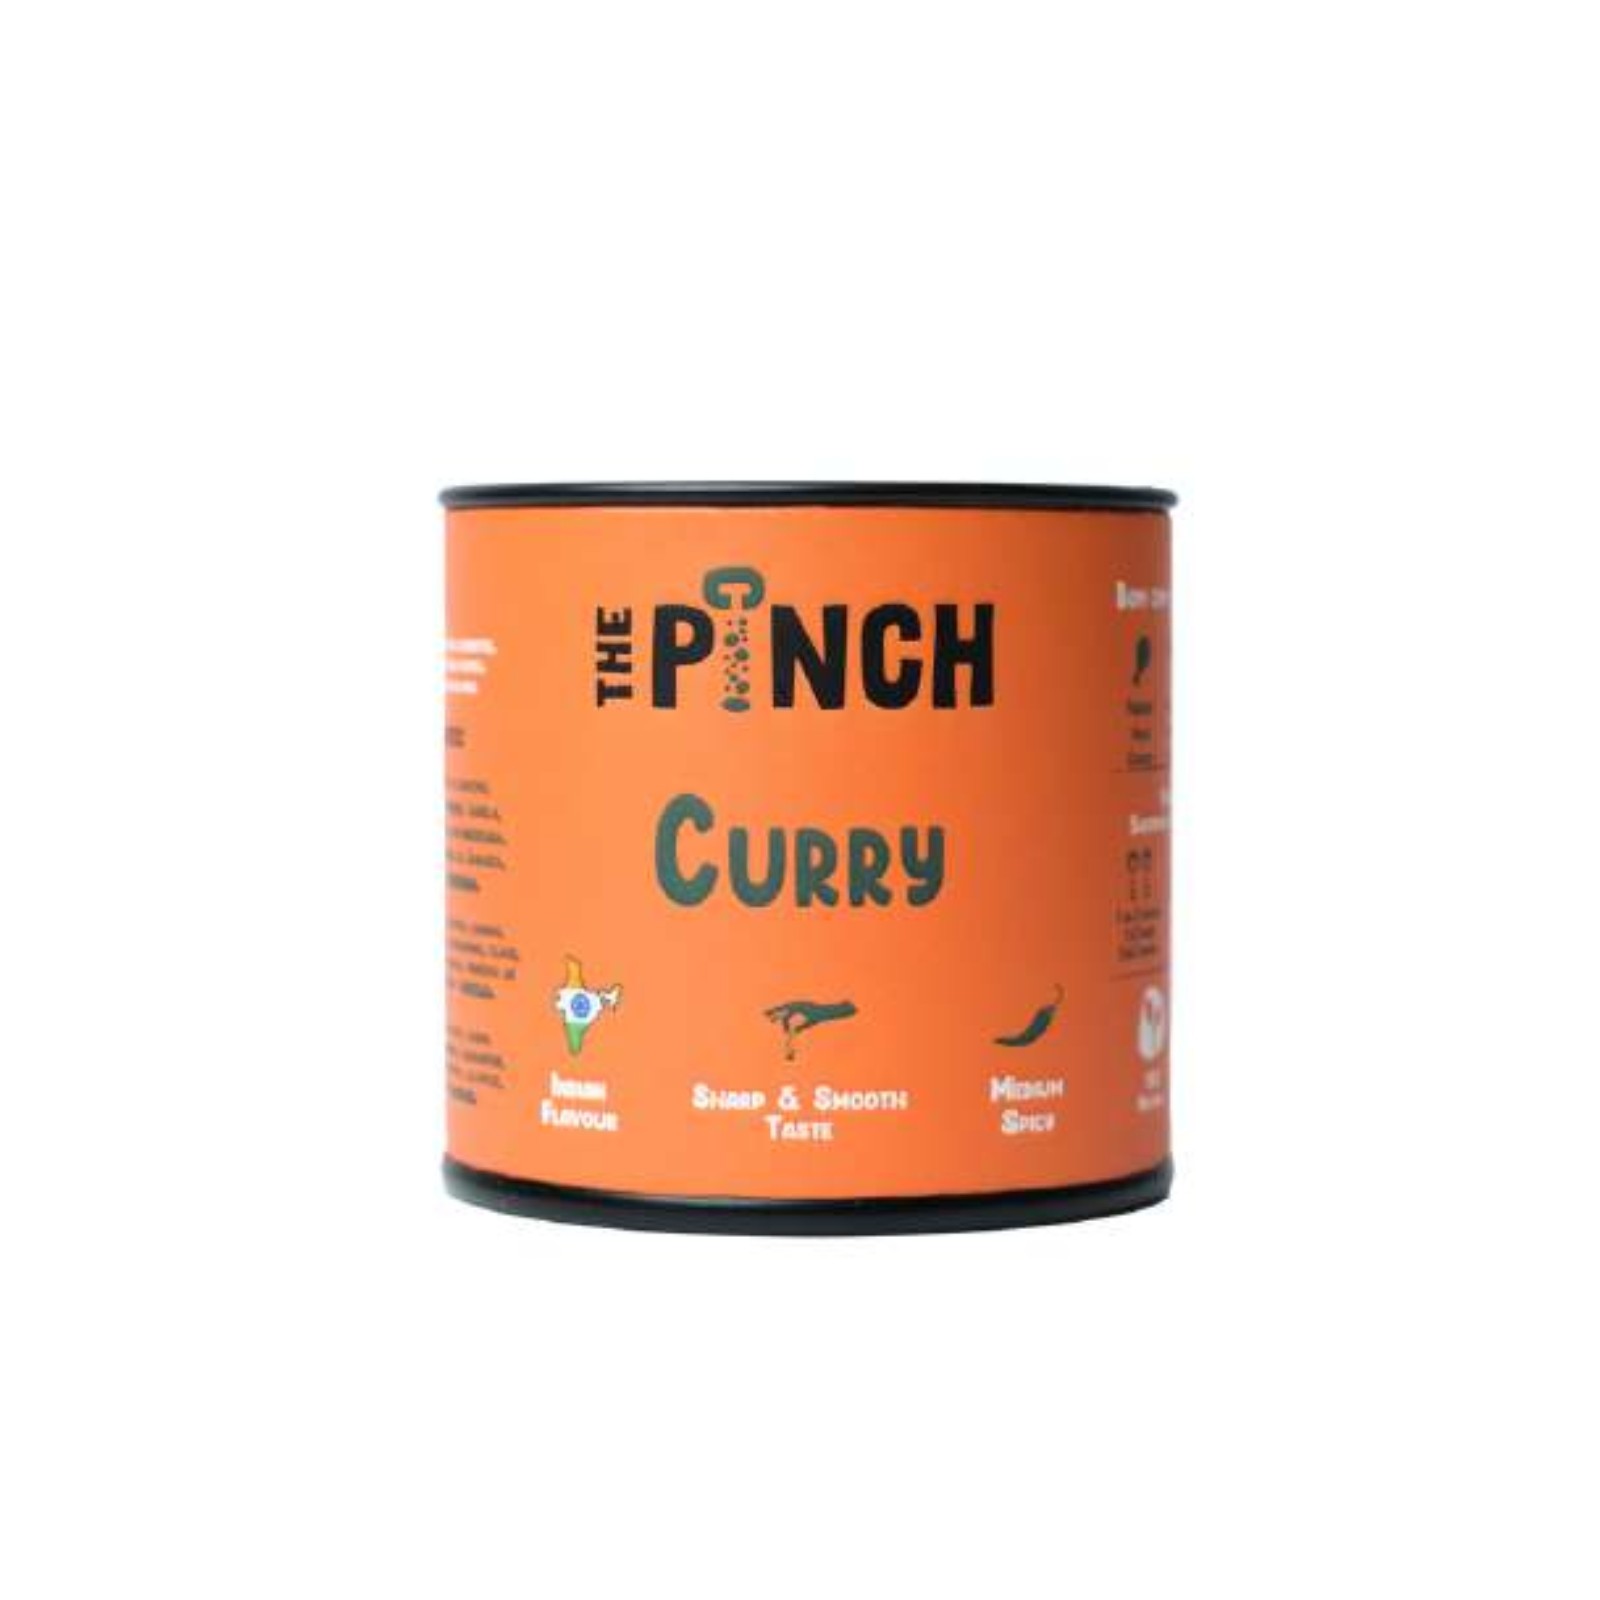 The Pinch Curry Seasoning